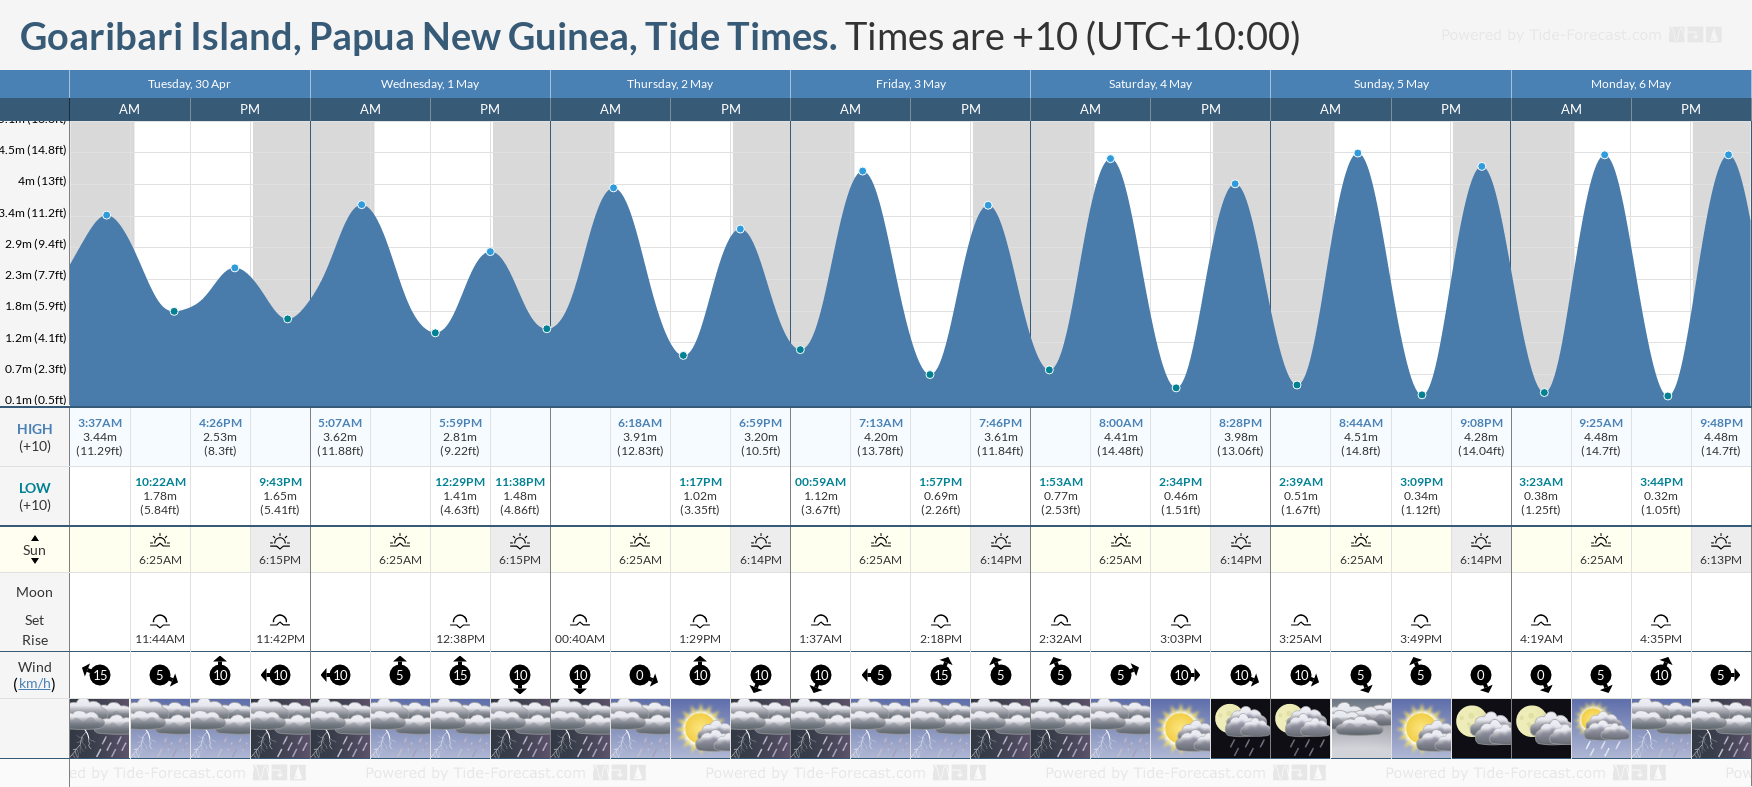 Goaribari Island, Papua New Guinea Tide Chart including high and low tide tide times for the next 7 days